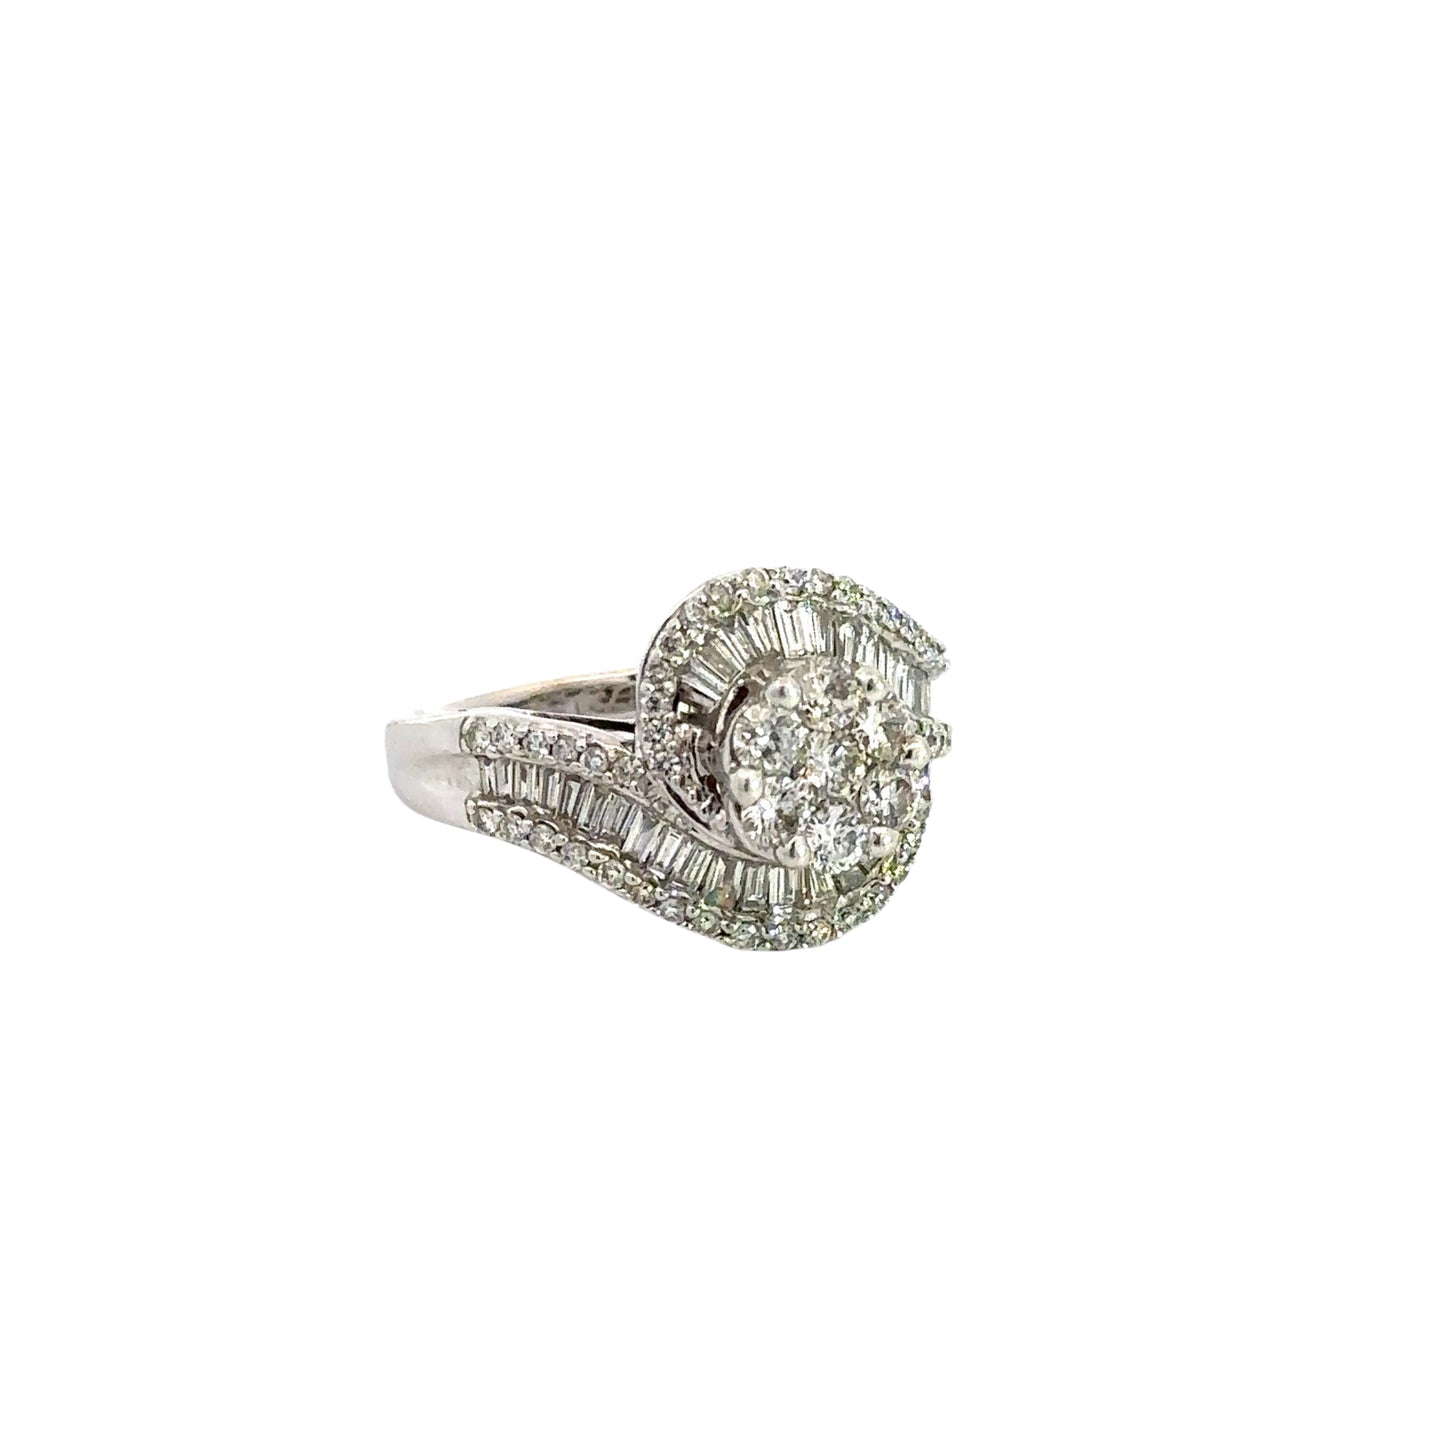 Diagonal view of diamond floral cluster ring